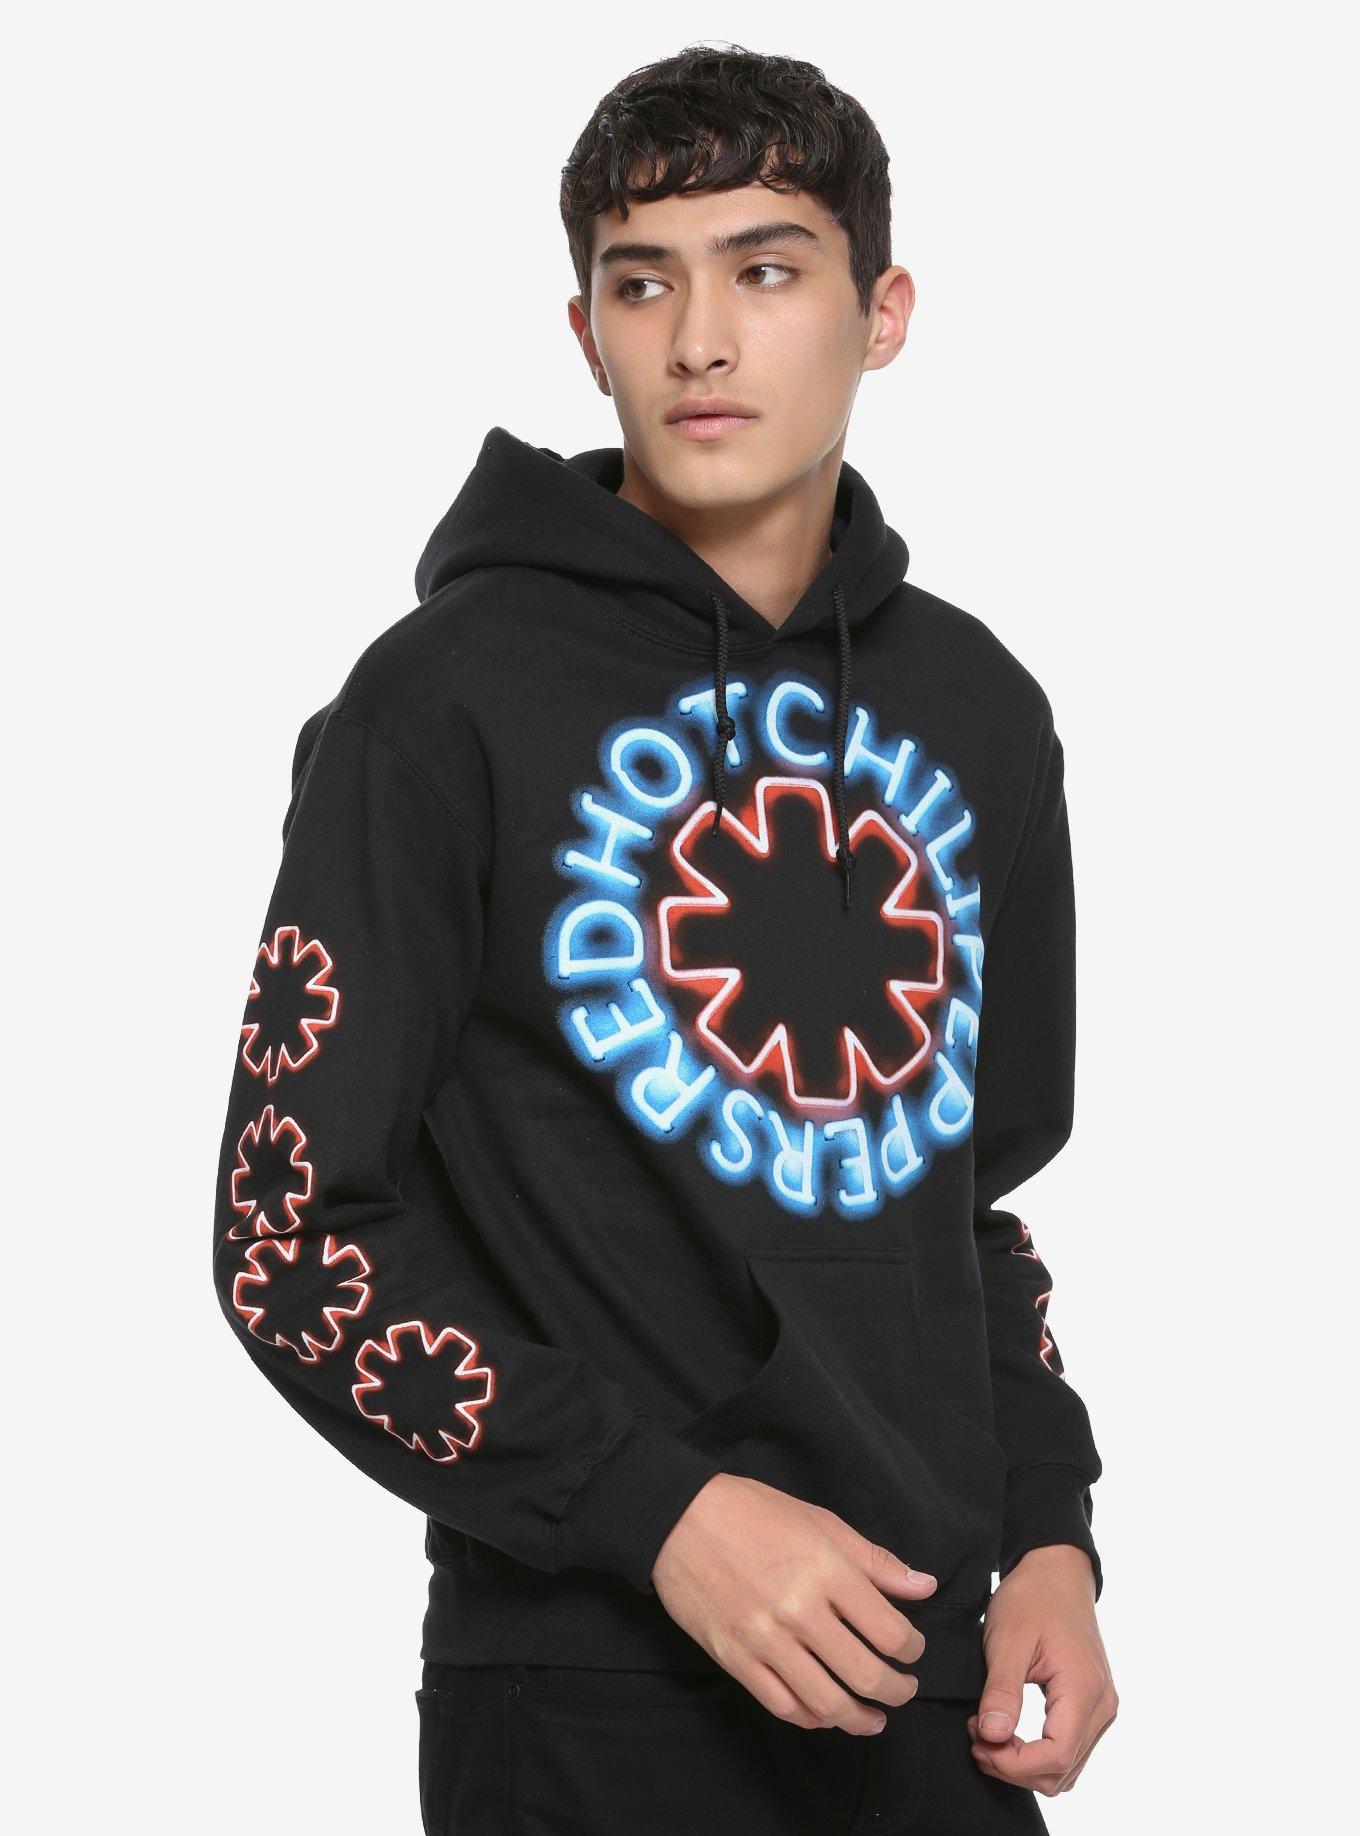 Red Hot Chili Peppers Neon Logo Hoodie, BLACK, hi-res